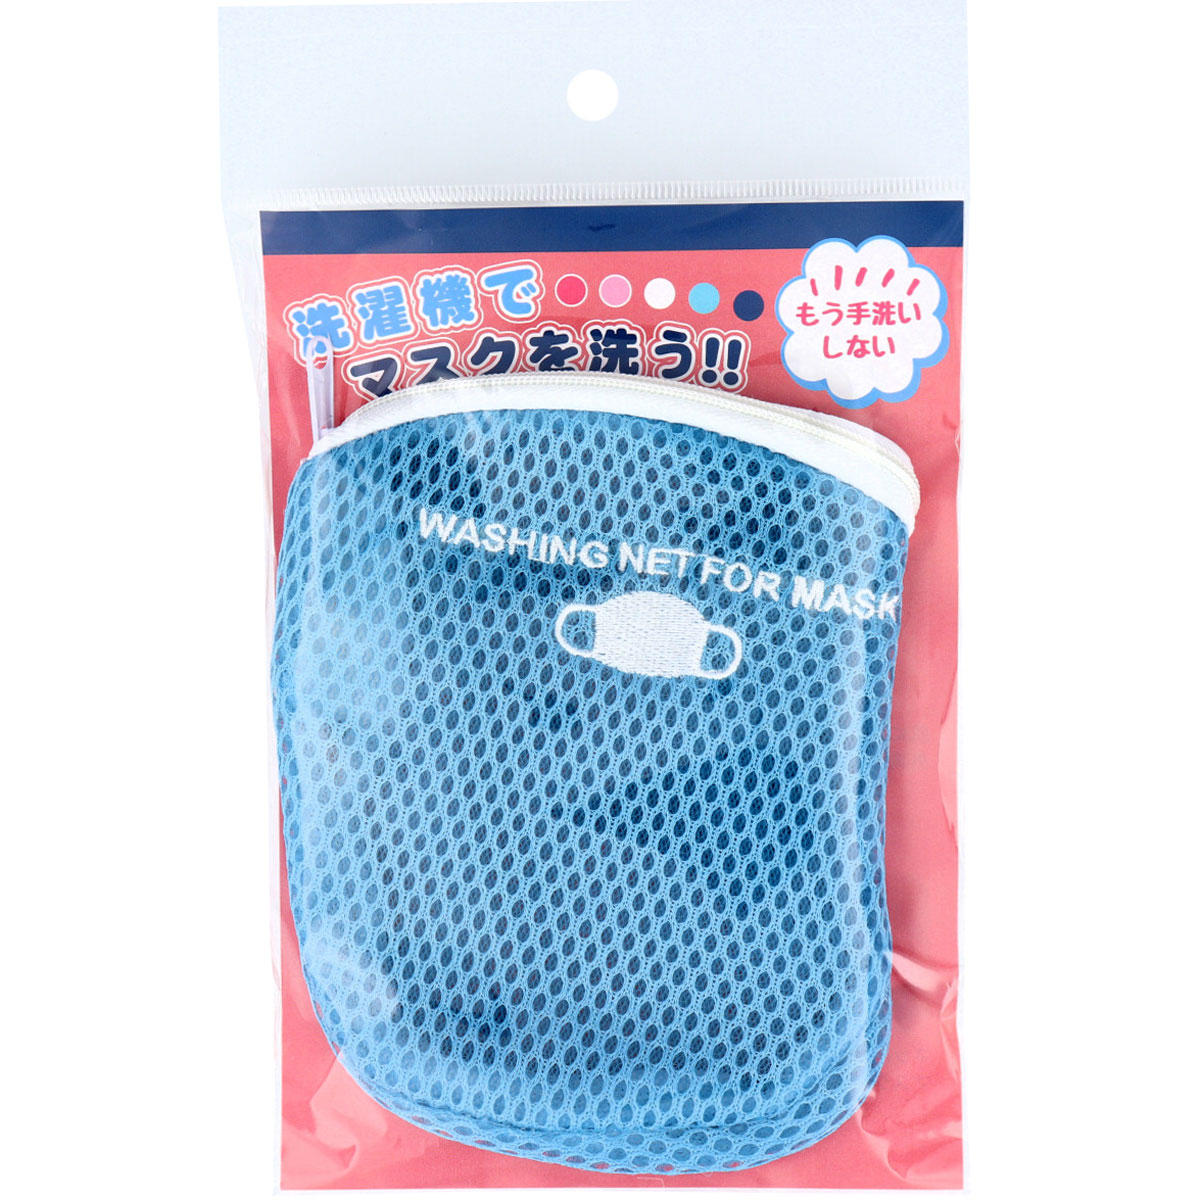 Picture of Blue color Washing bag for a face mask